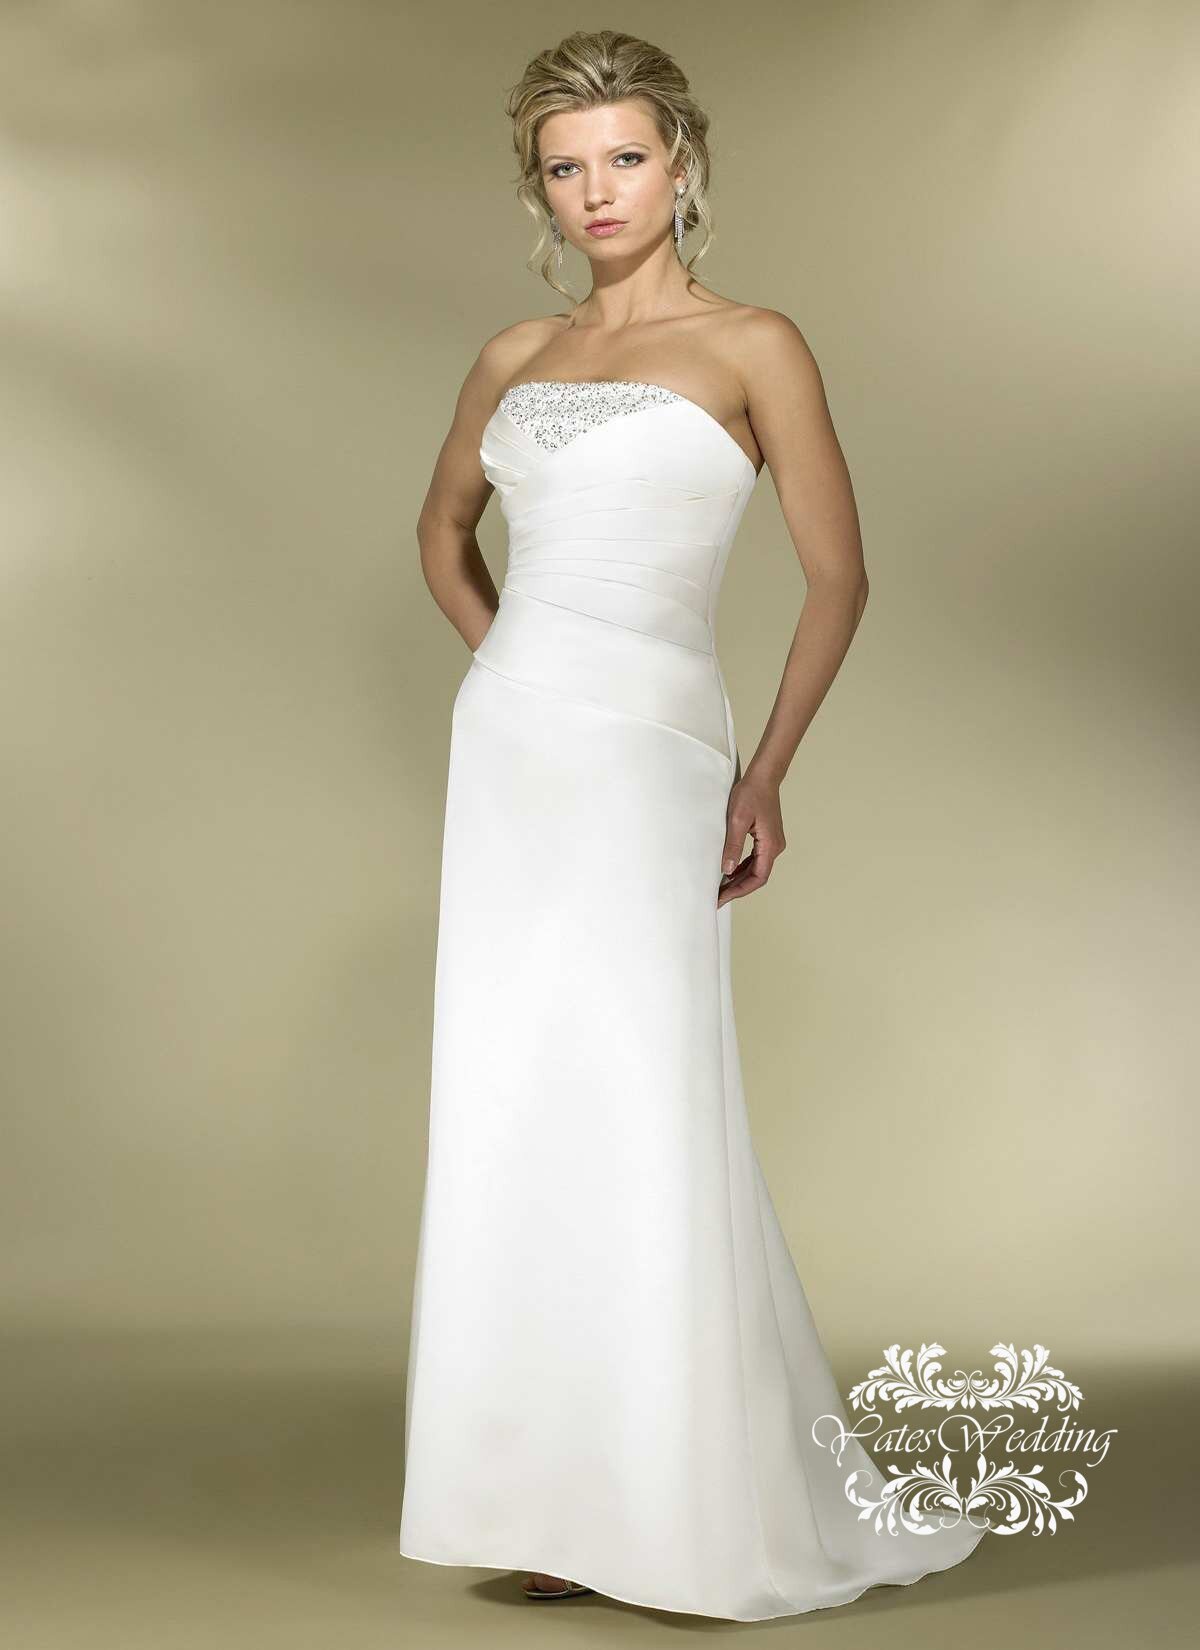 Jcpenney wedding dresses Photo - 1